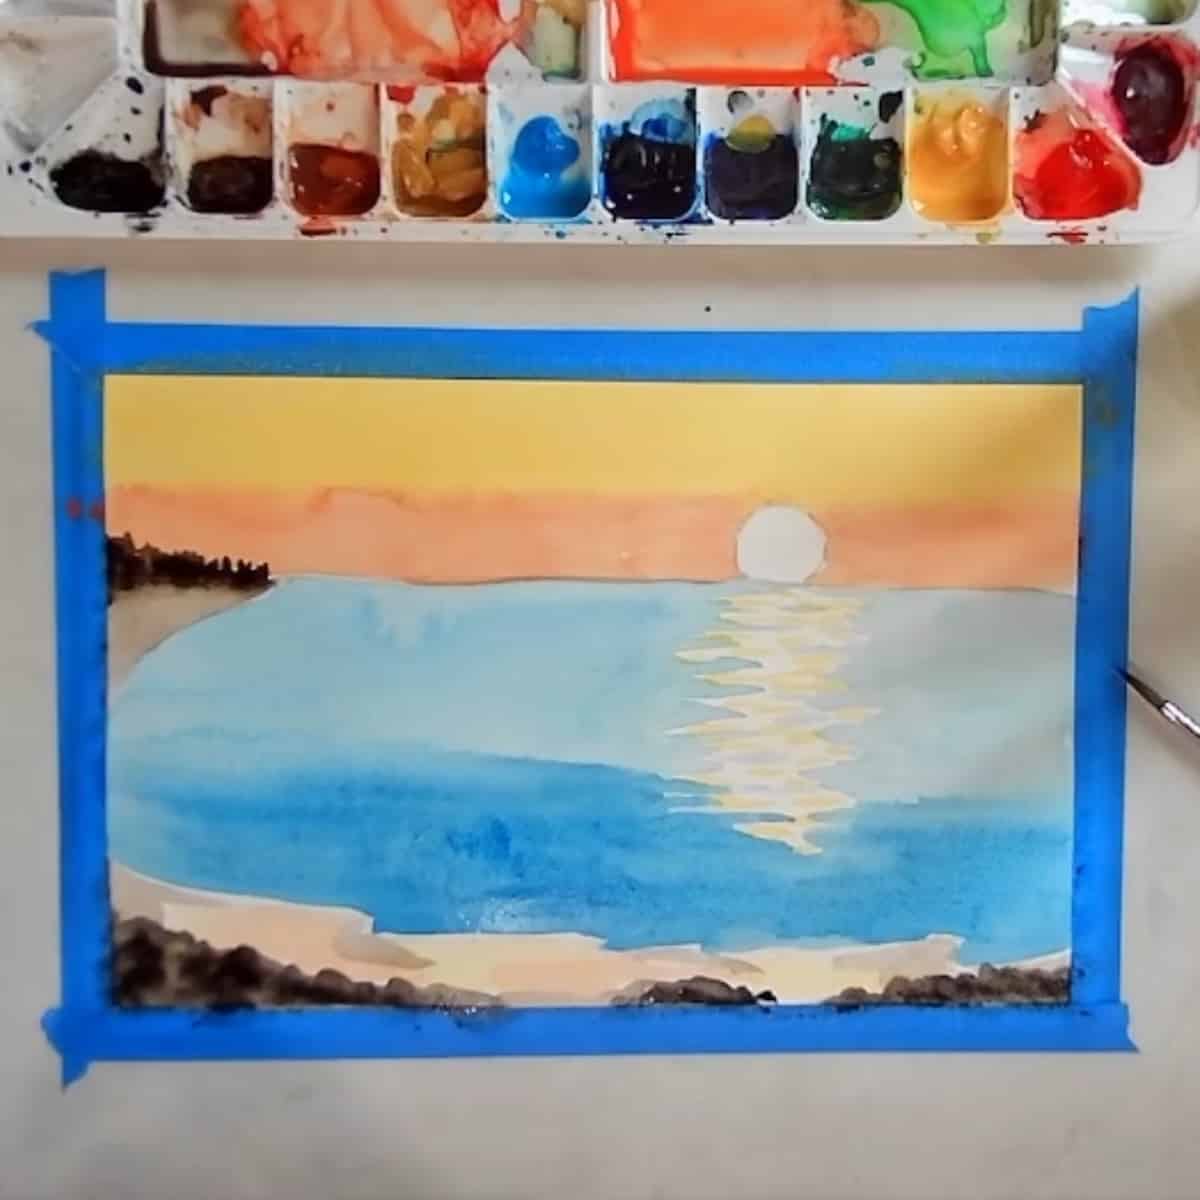 A watercolor painting in progress of a beach sunset.